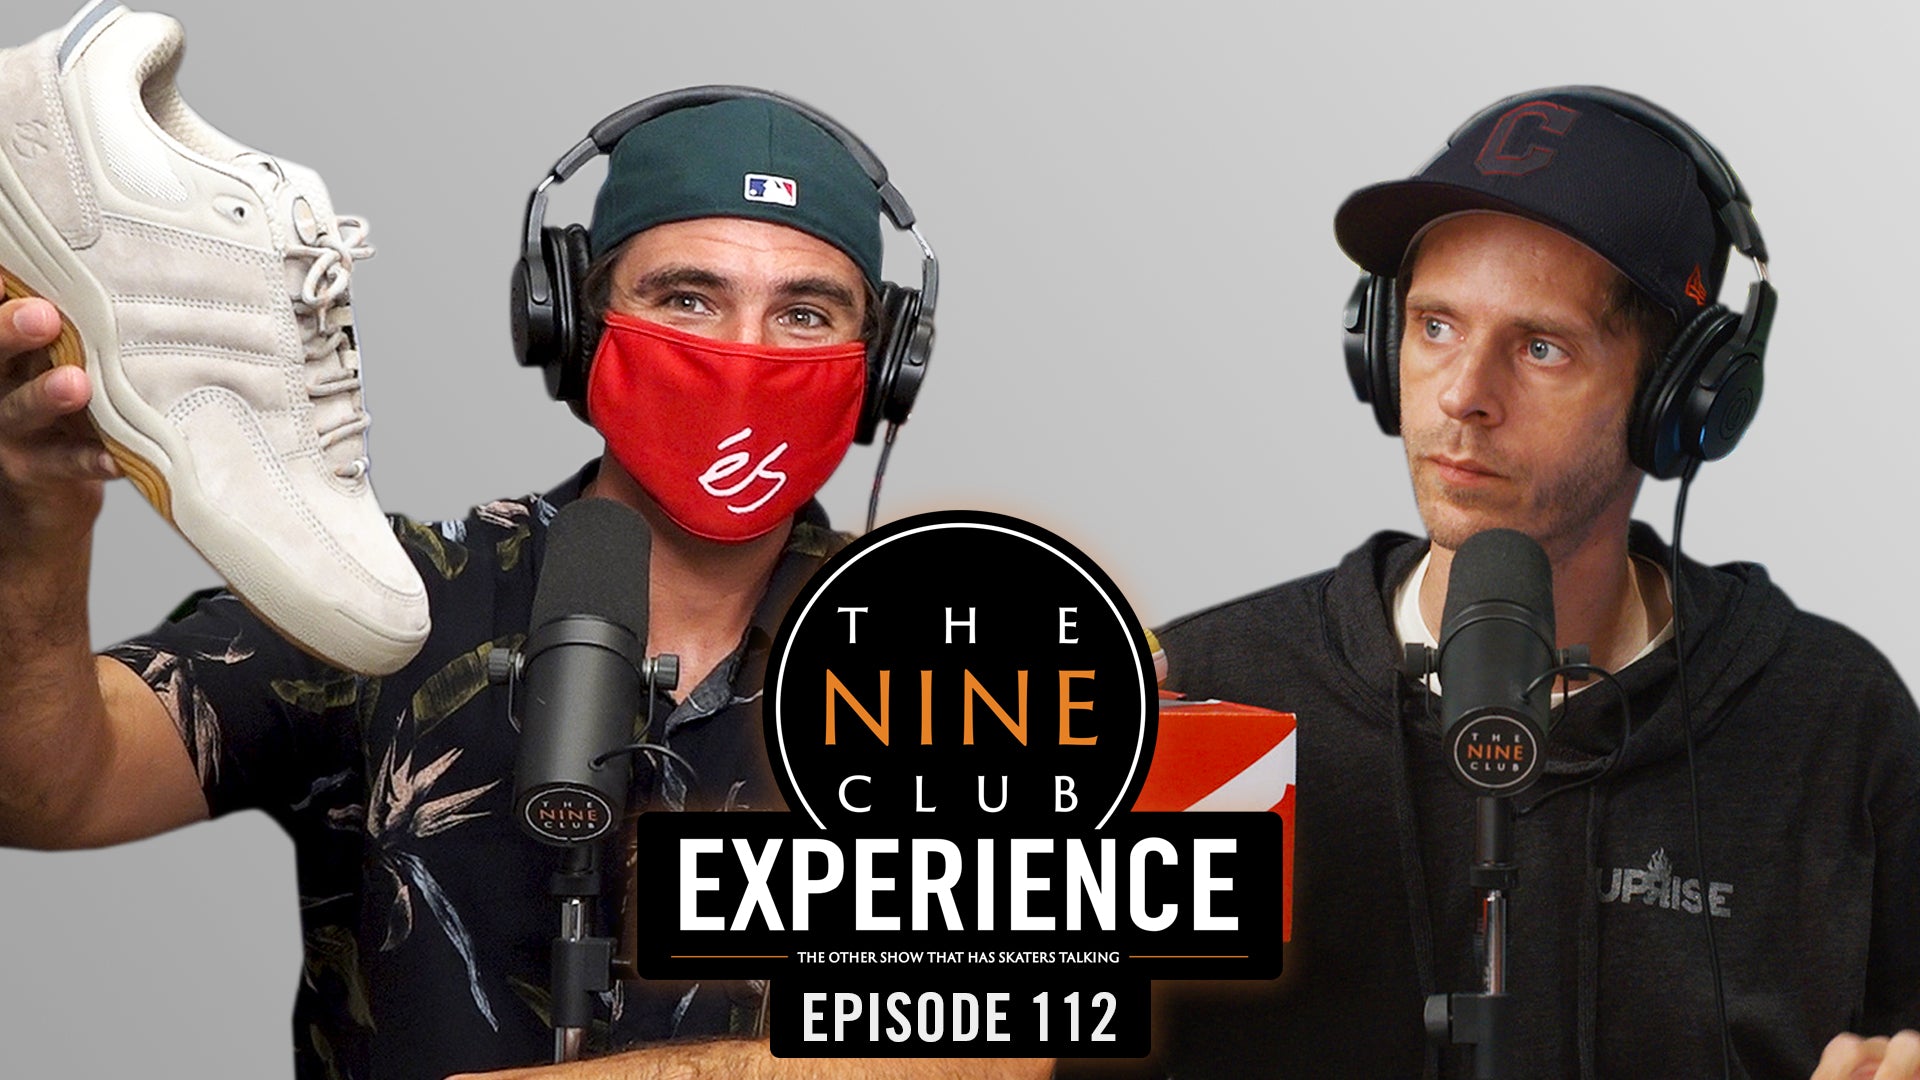 The Nine Club Experience Episode 112